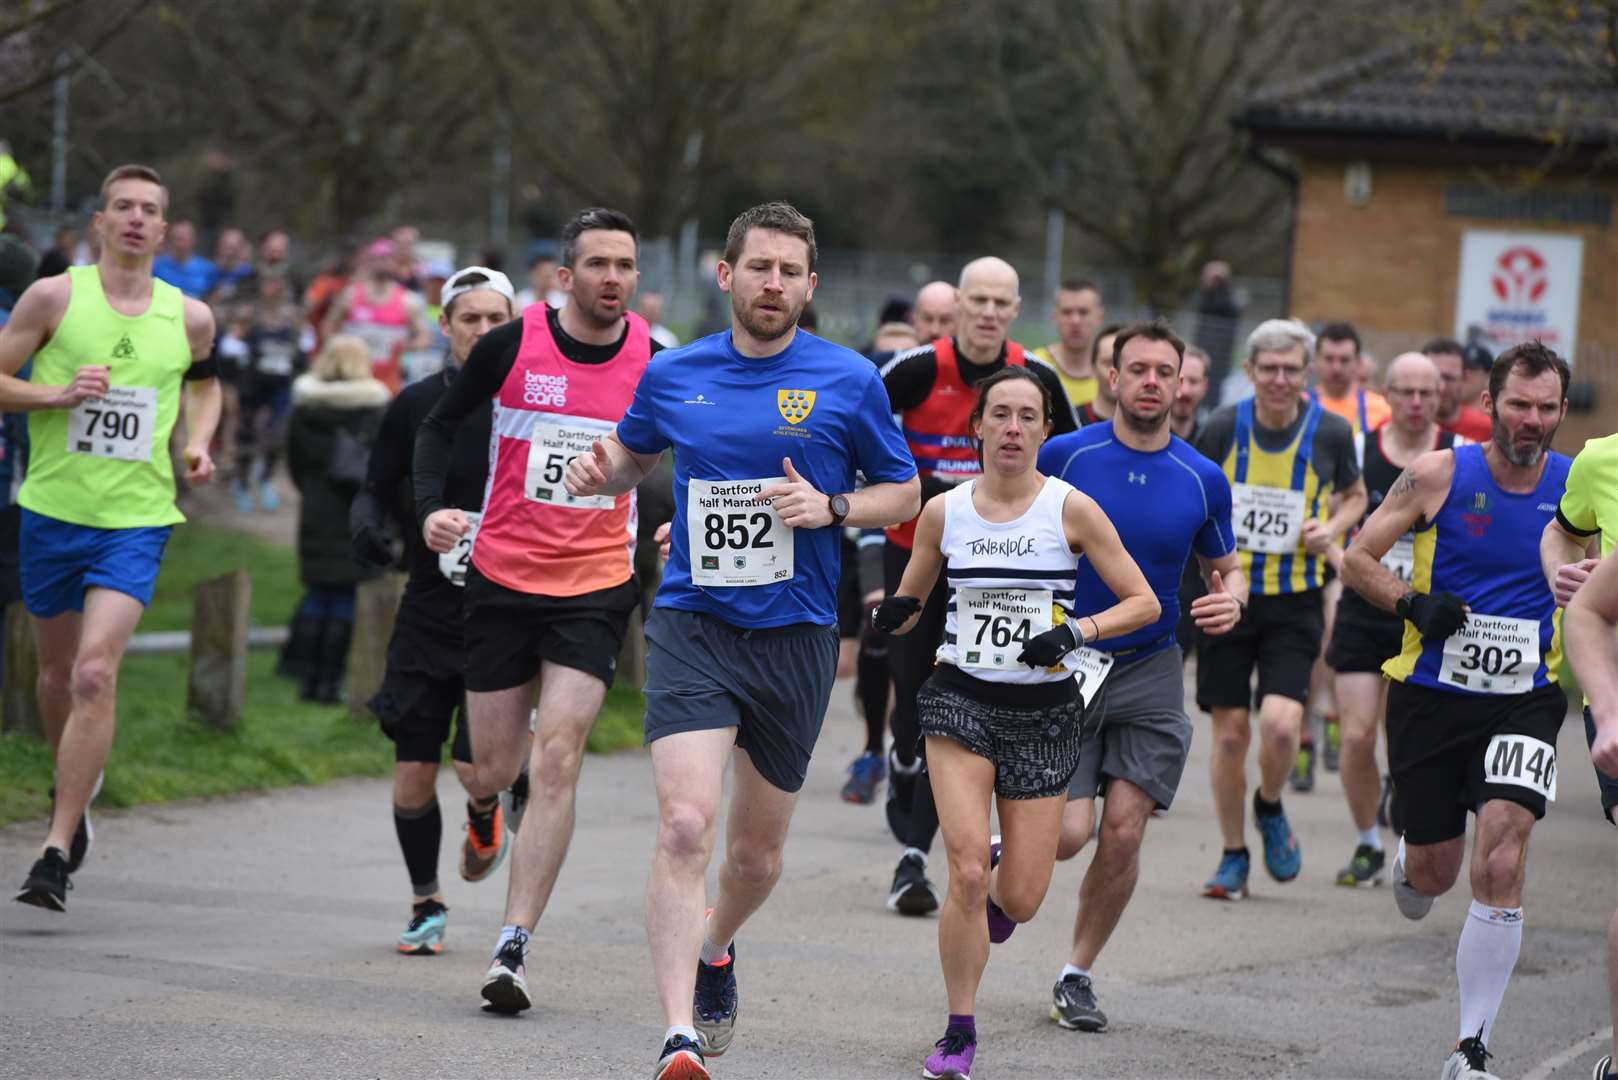 Runners taking part in this year's Dartford Half Marathon - but could an international-standard marathon be staged in Kent? Picture: Ken Mears